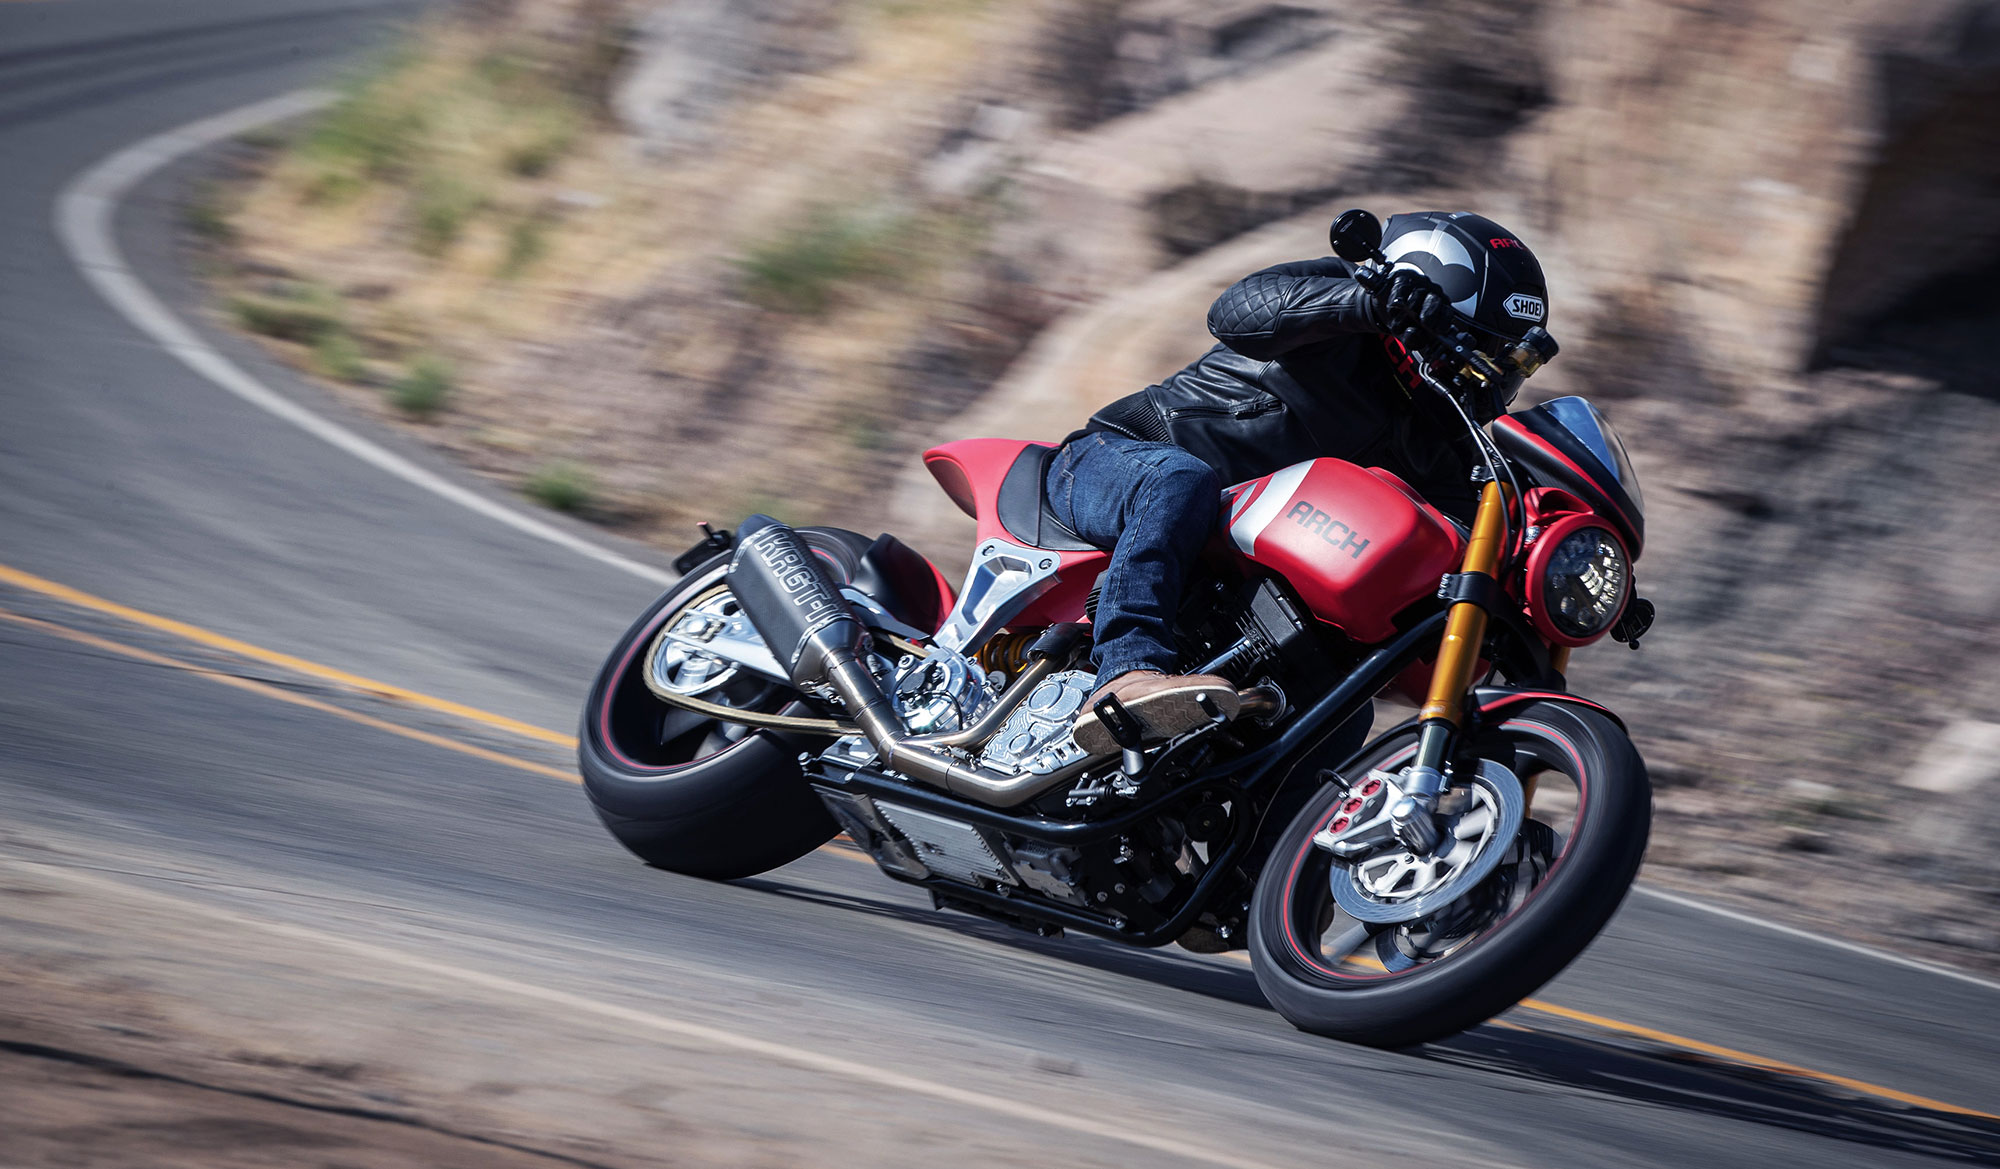 ARCH motorcycle-ohlins-contest